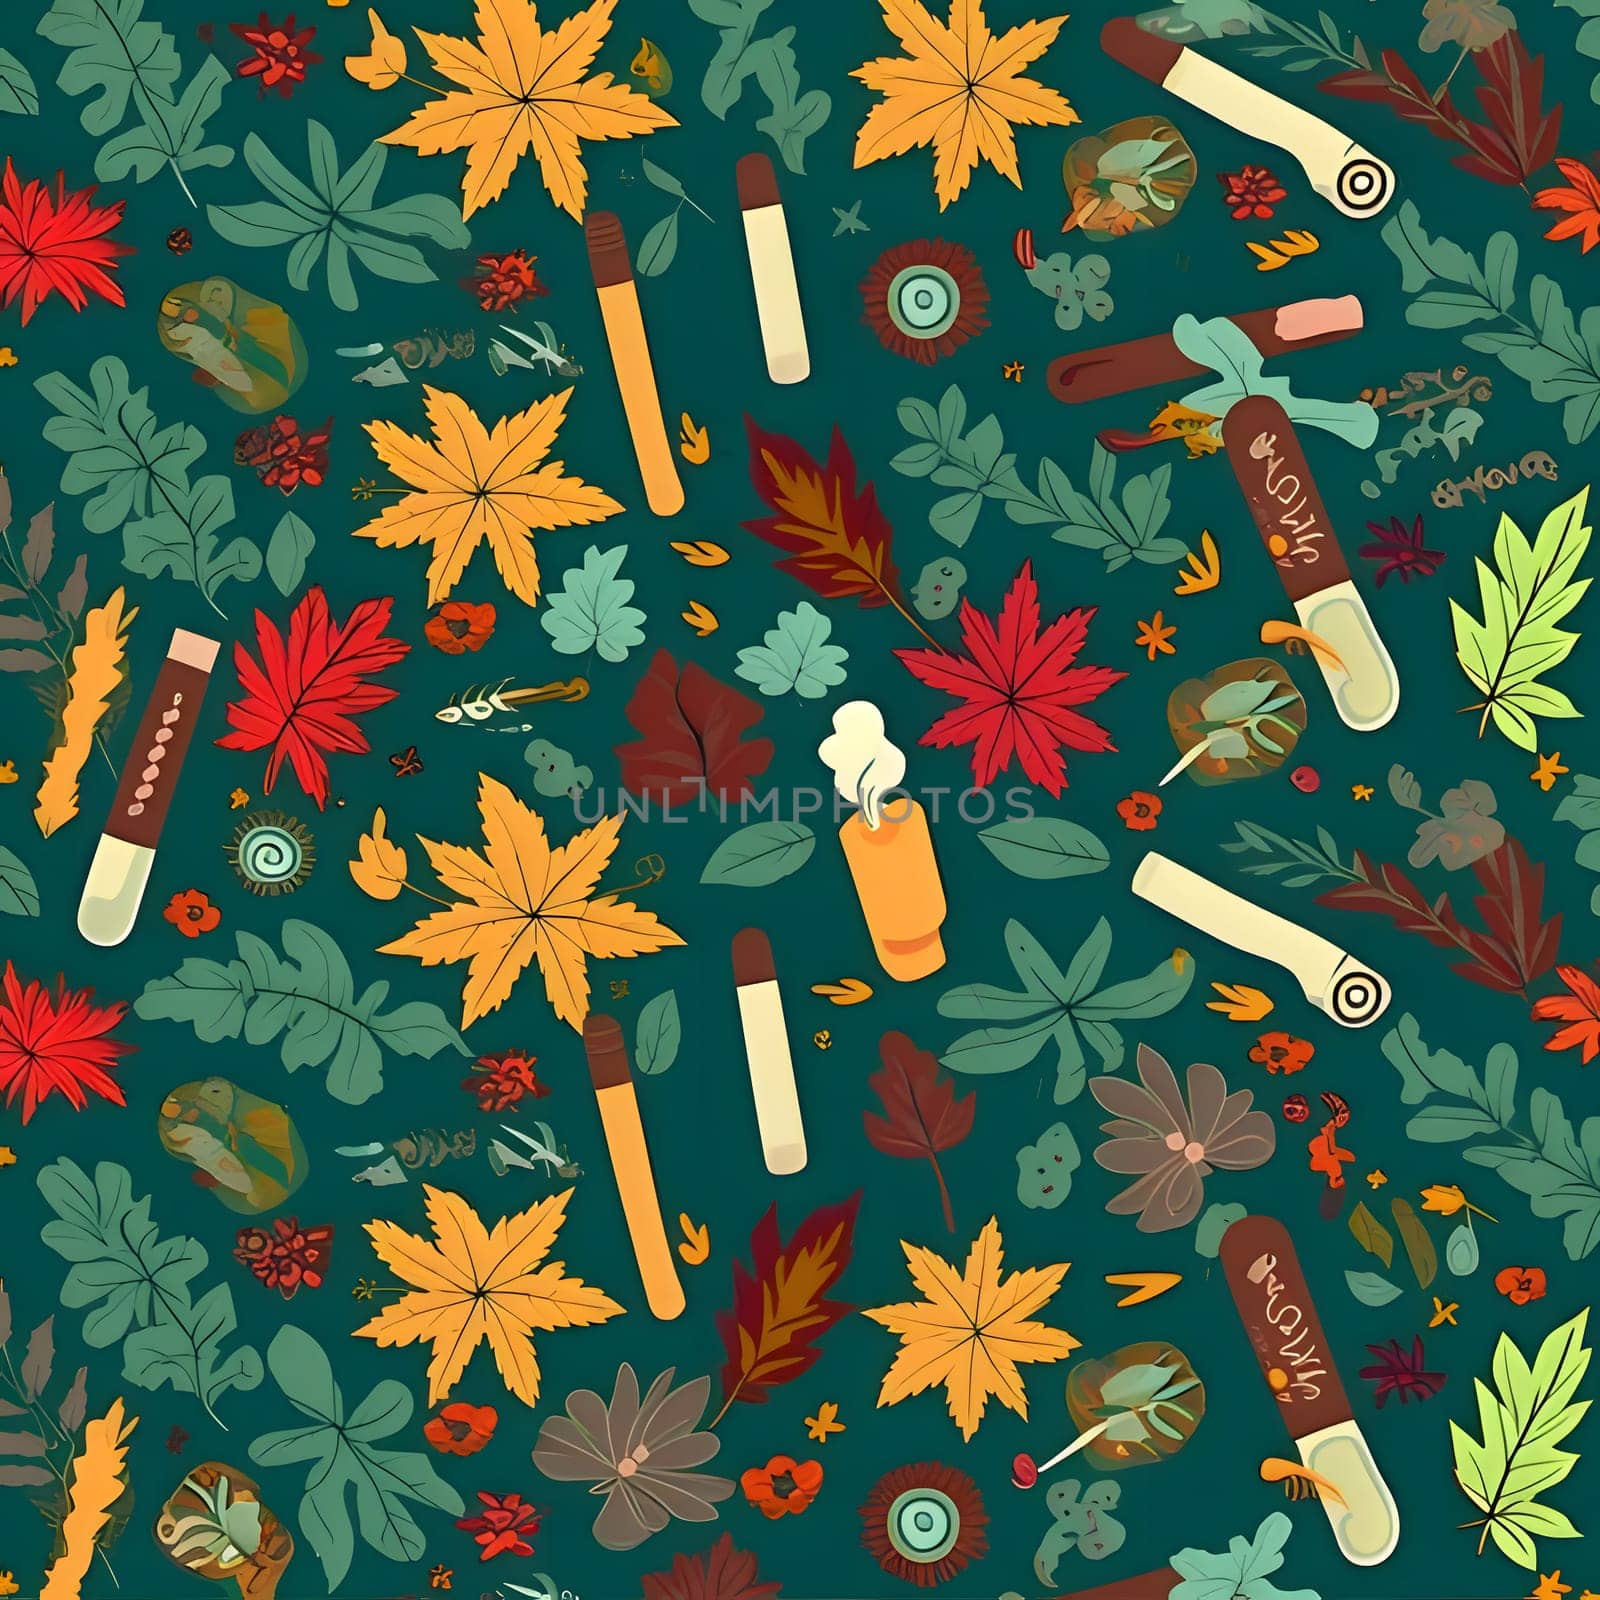 Patterns and banners backgrounds: Seamless pattern with autumn leaves and cigarettes. Vector illustration.